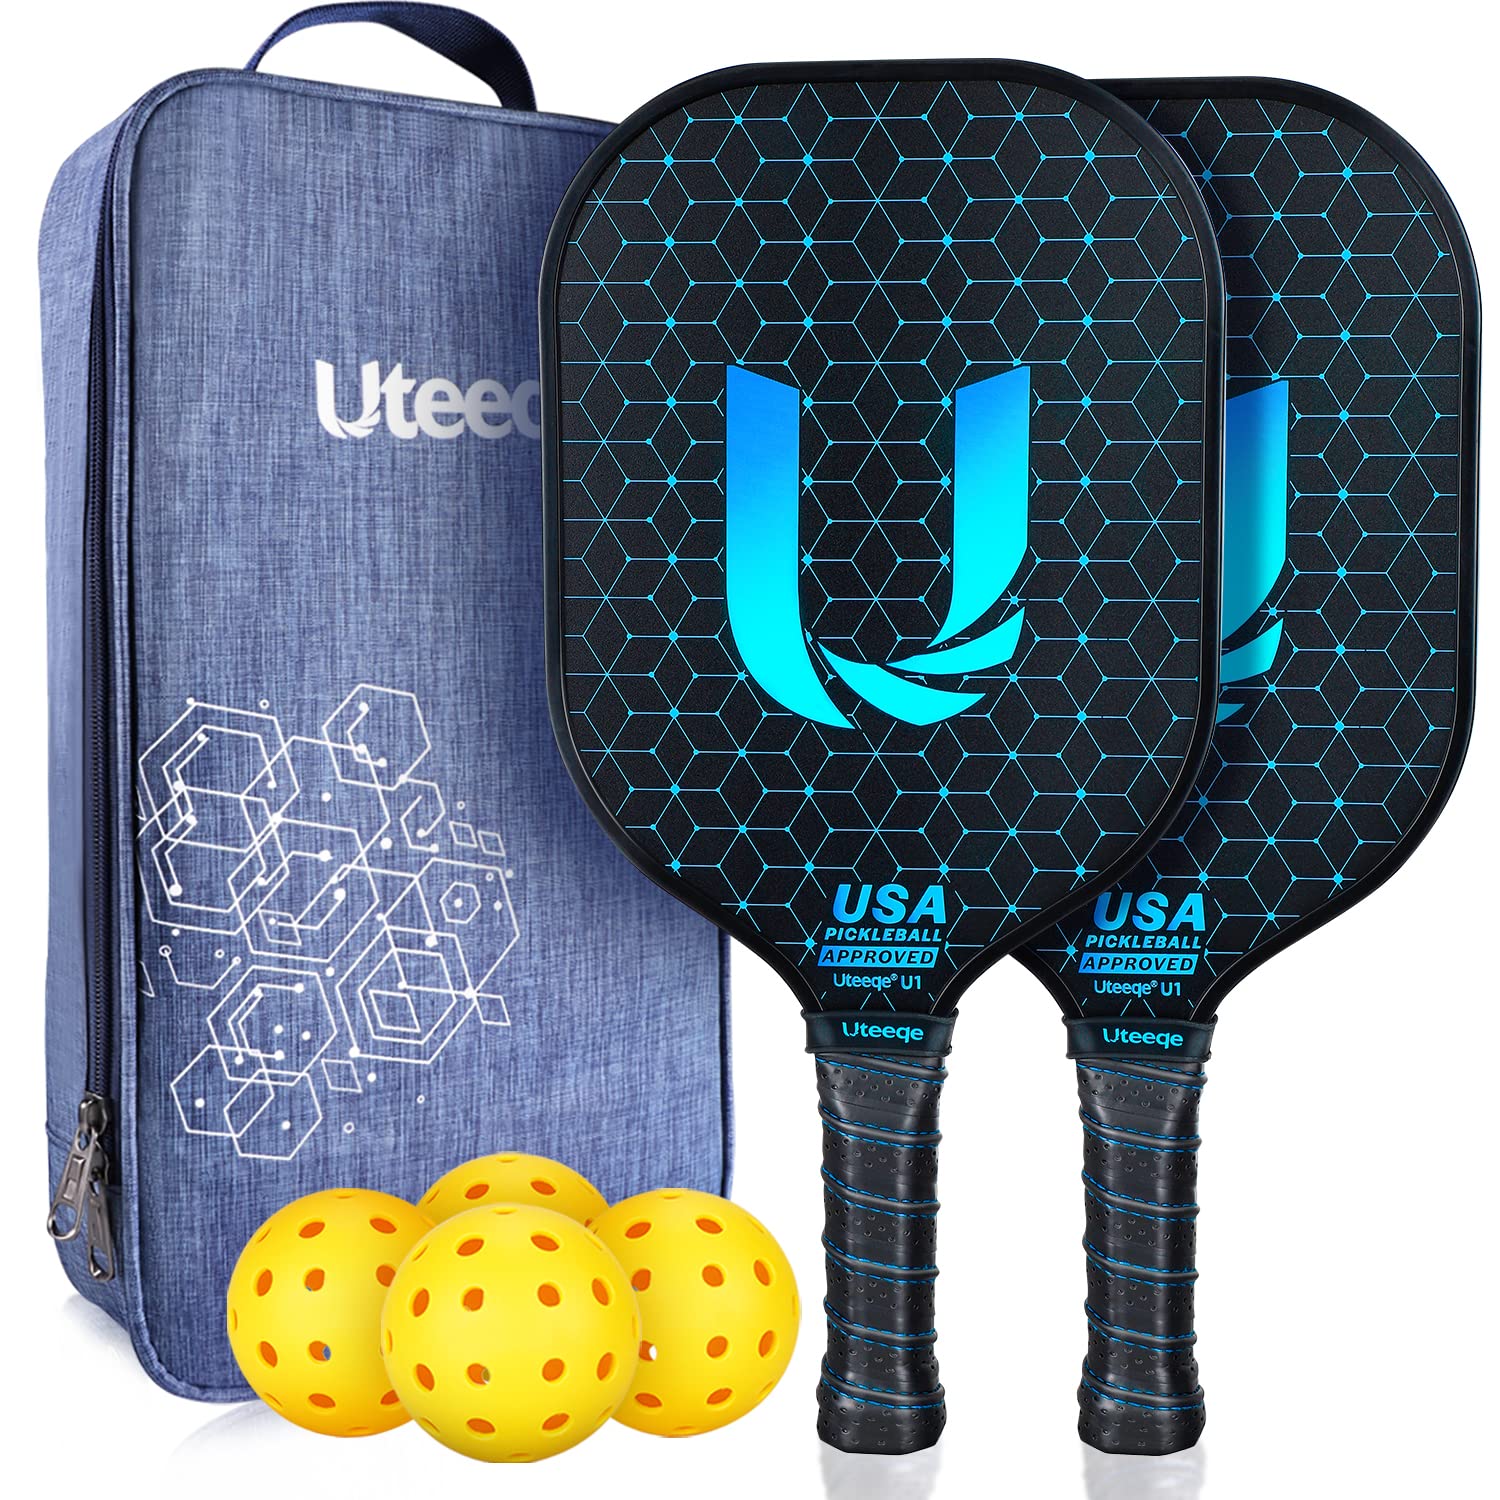  Uteeqe Pickleball Paddles Set of 2 - Graphite Surface with High Grit & Spin, USAPA Approved Pickleball Set Pickle Ball Raquette Lightweight Polymer Honeycomb Non-Slip Grip w/ 4 Outdoor Balls &...